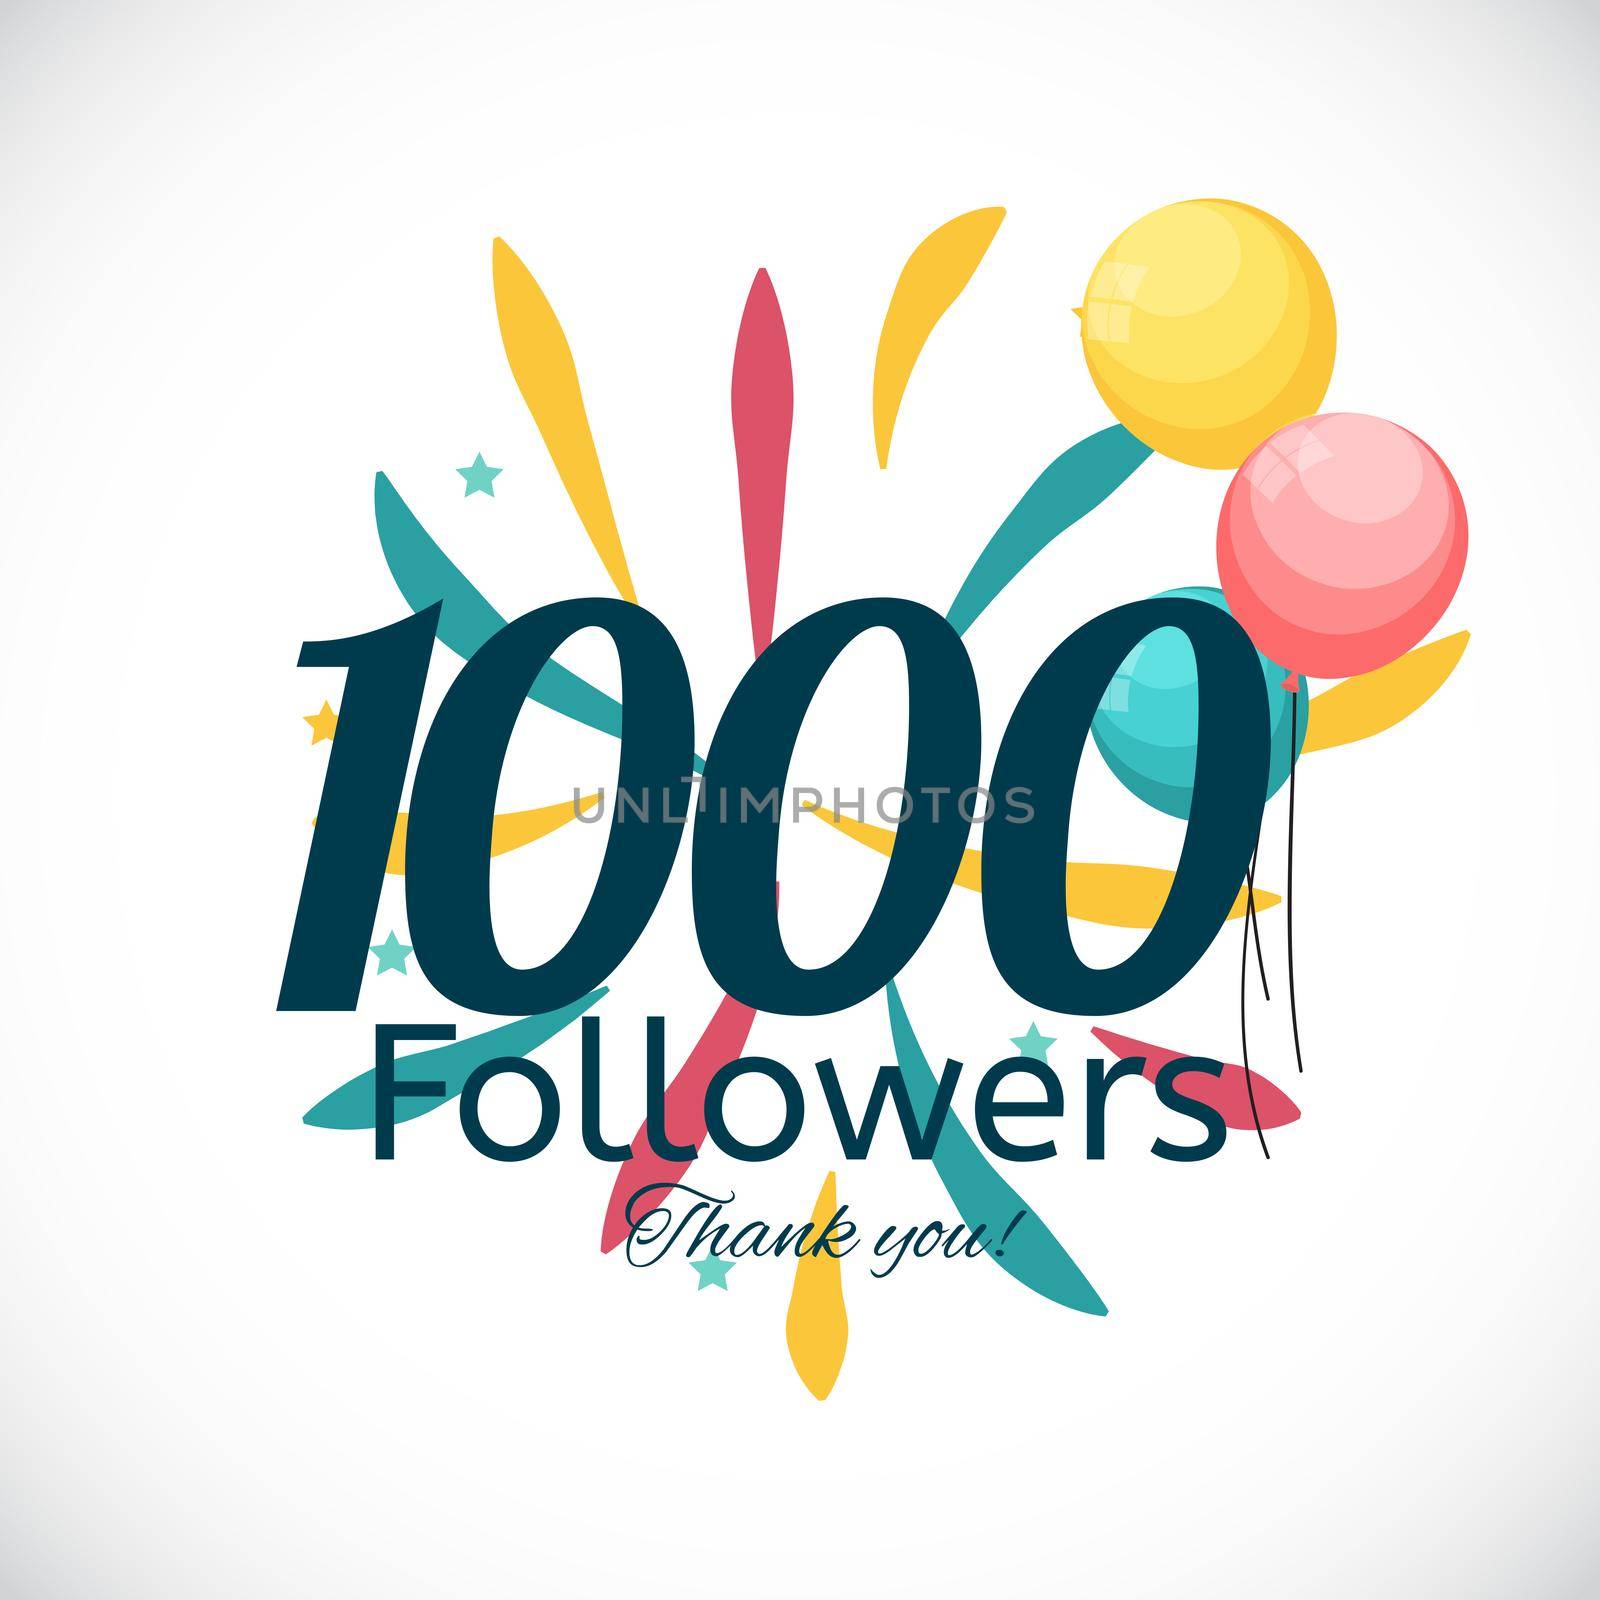 1000 Followers. Thank you. Vector Illustration Background by yganko